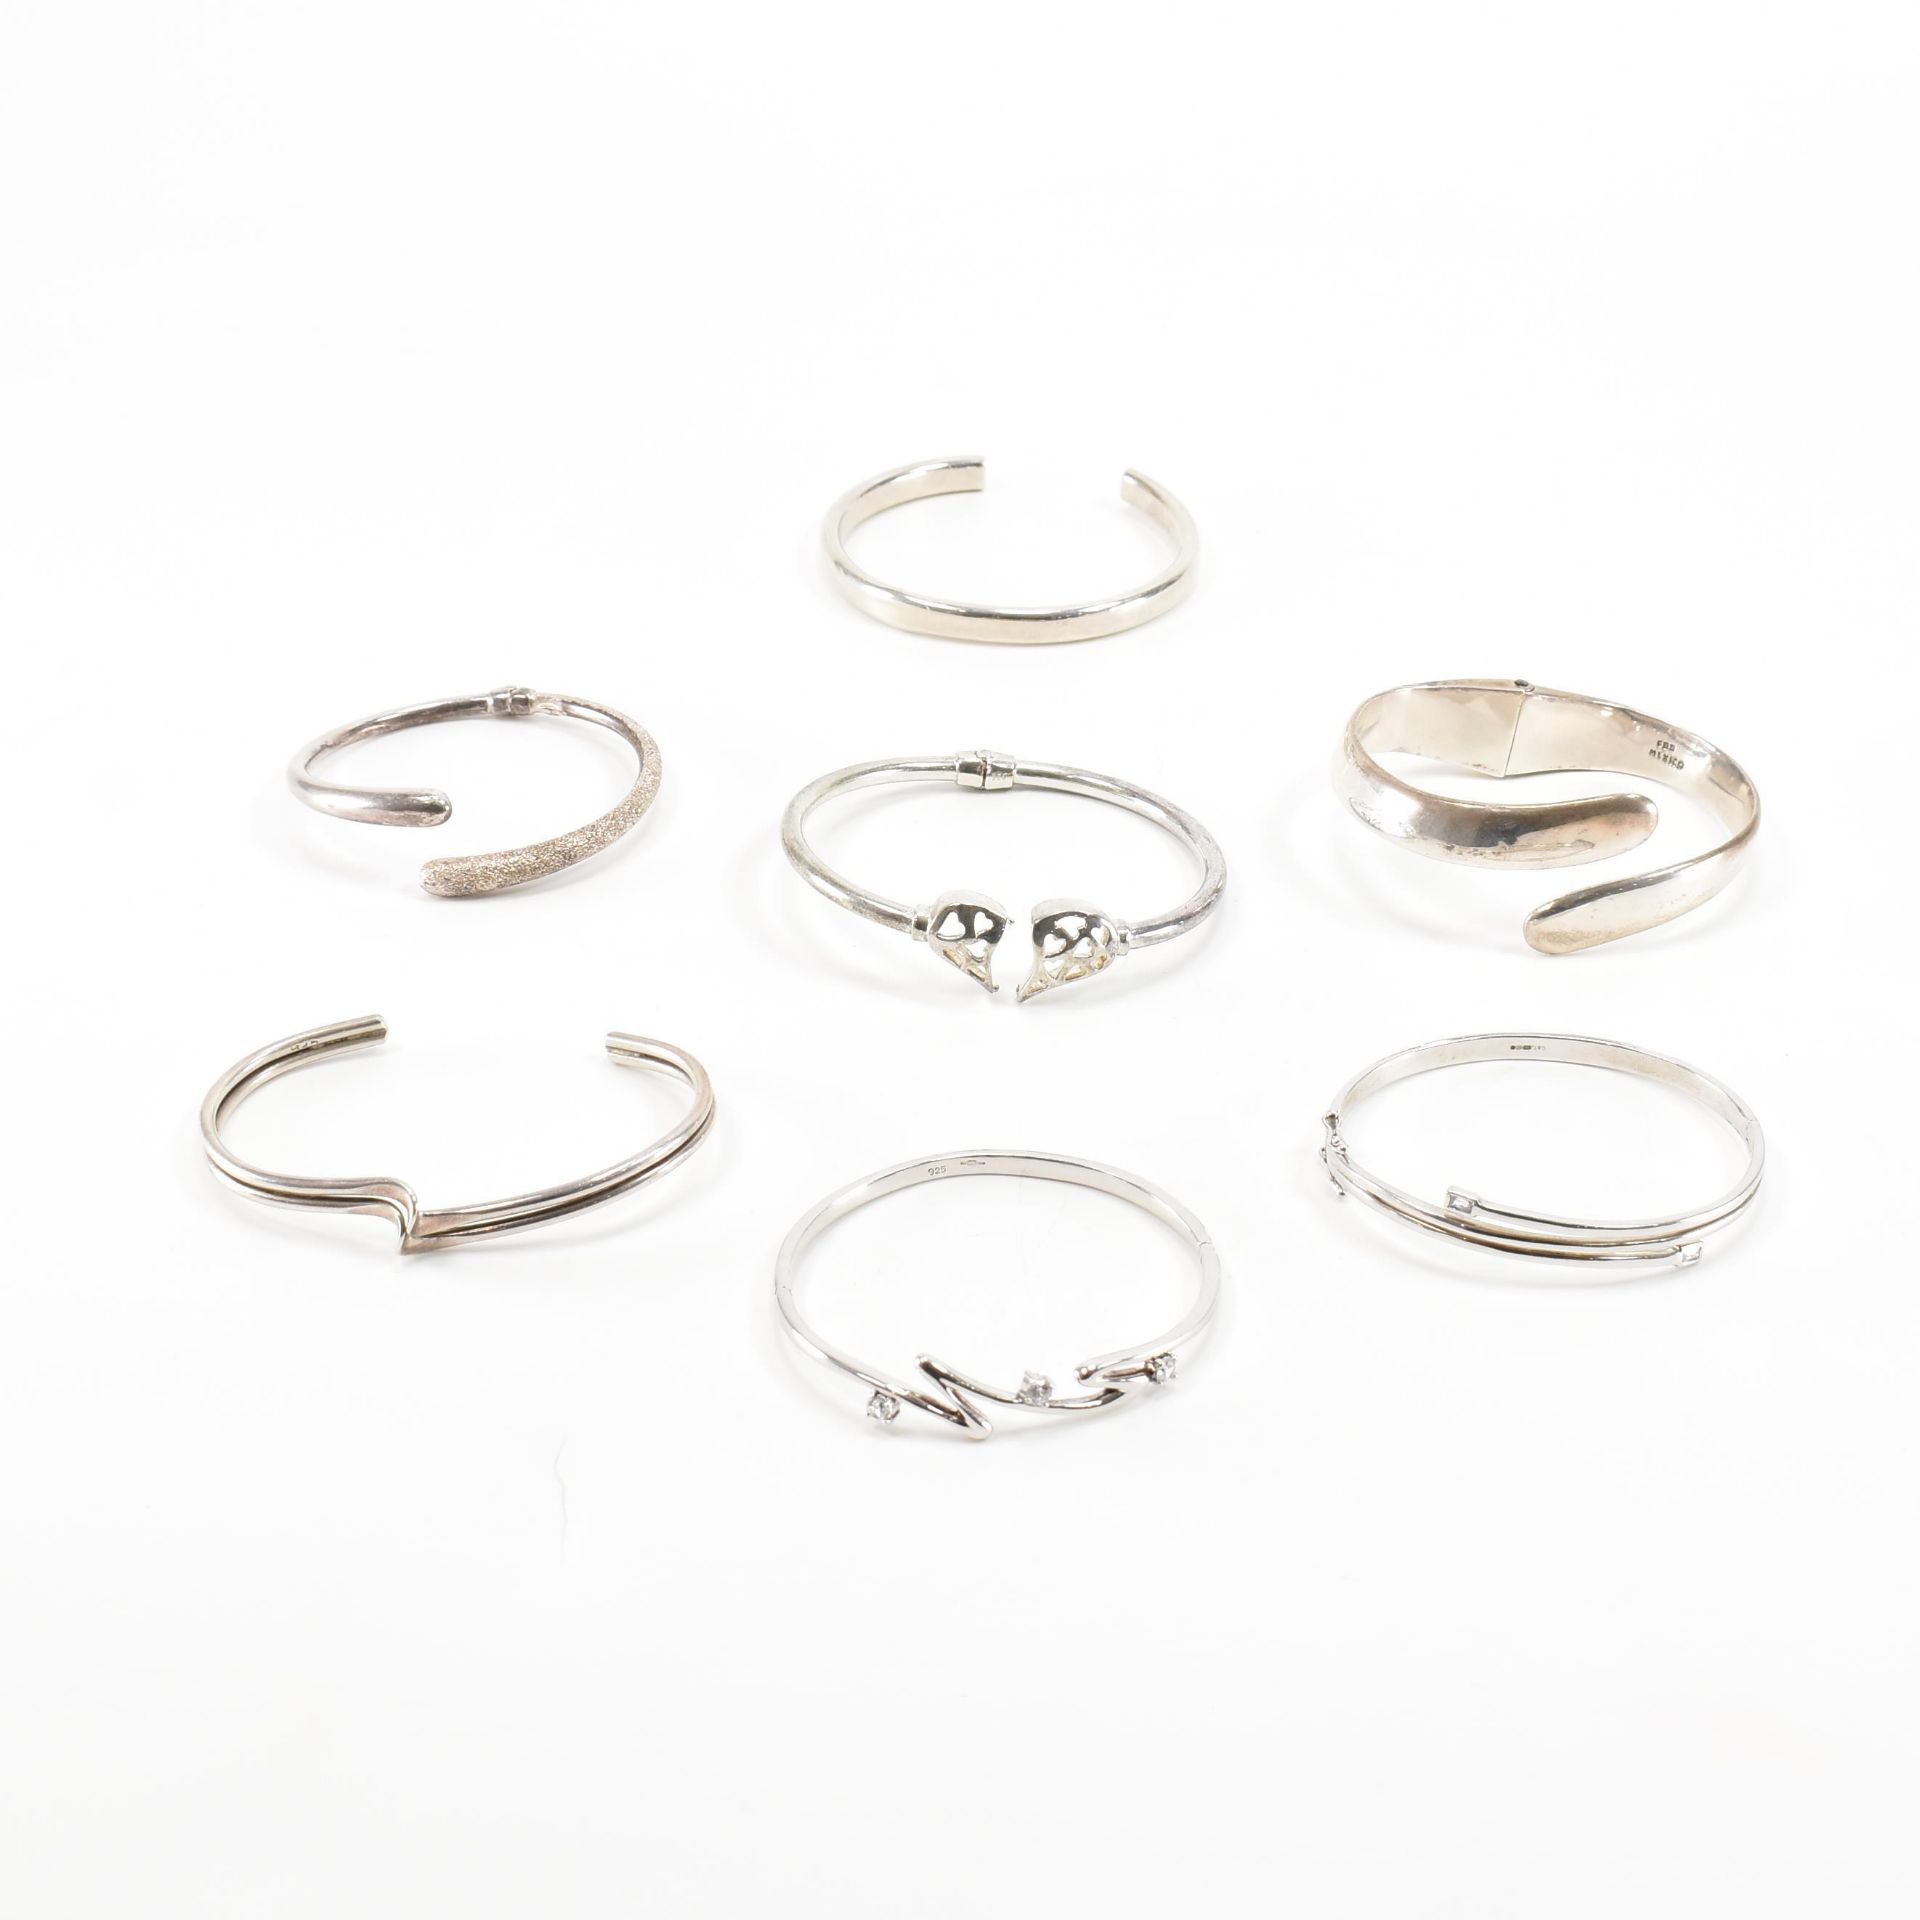 COLLECTION OF ASSORTED 925 SILVER BANGLES - Image 2 of 3